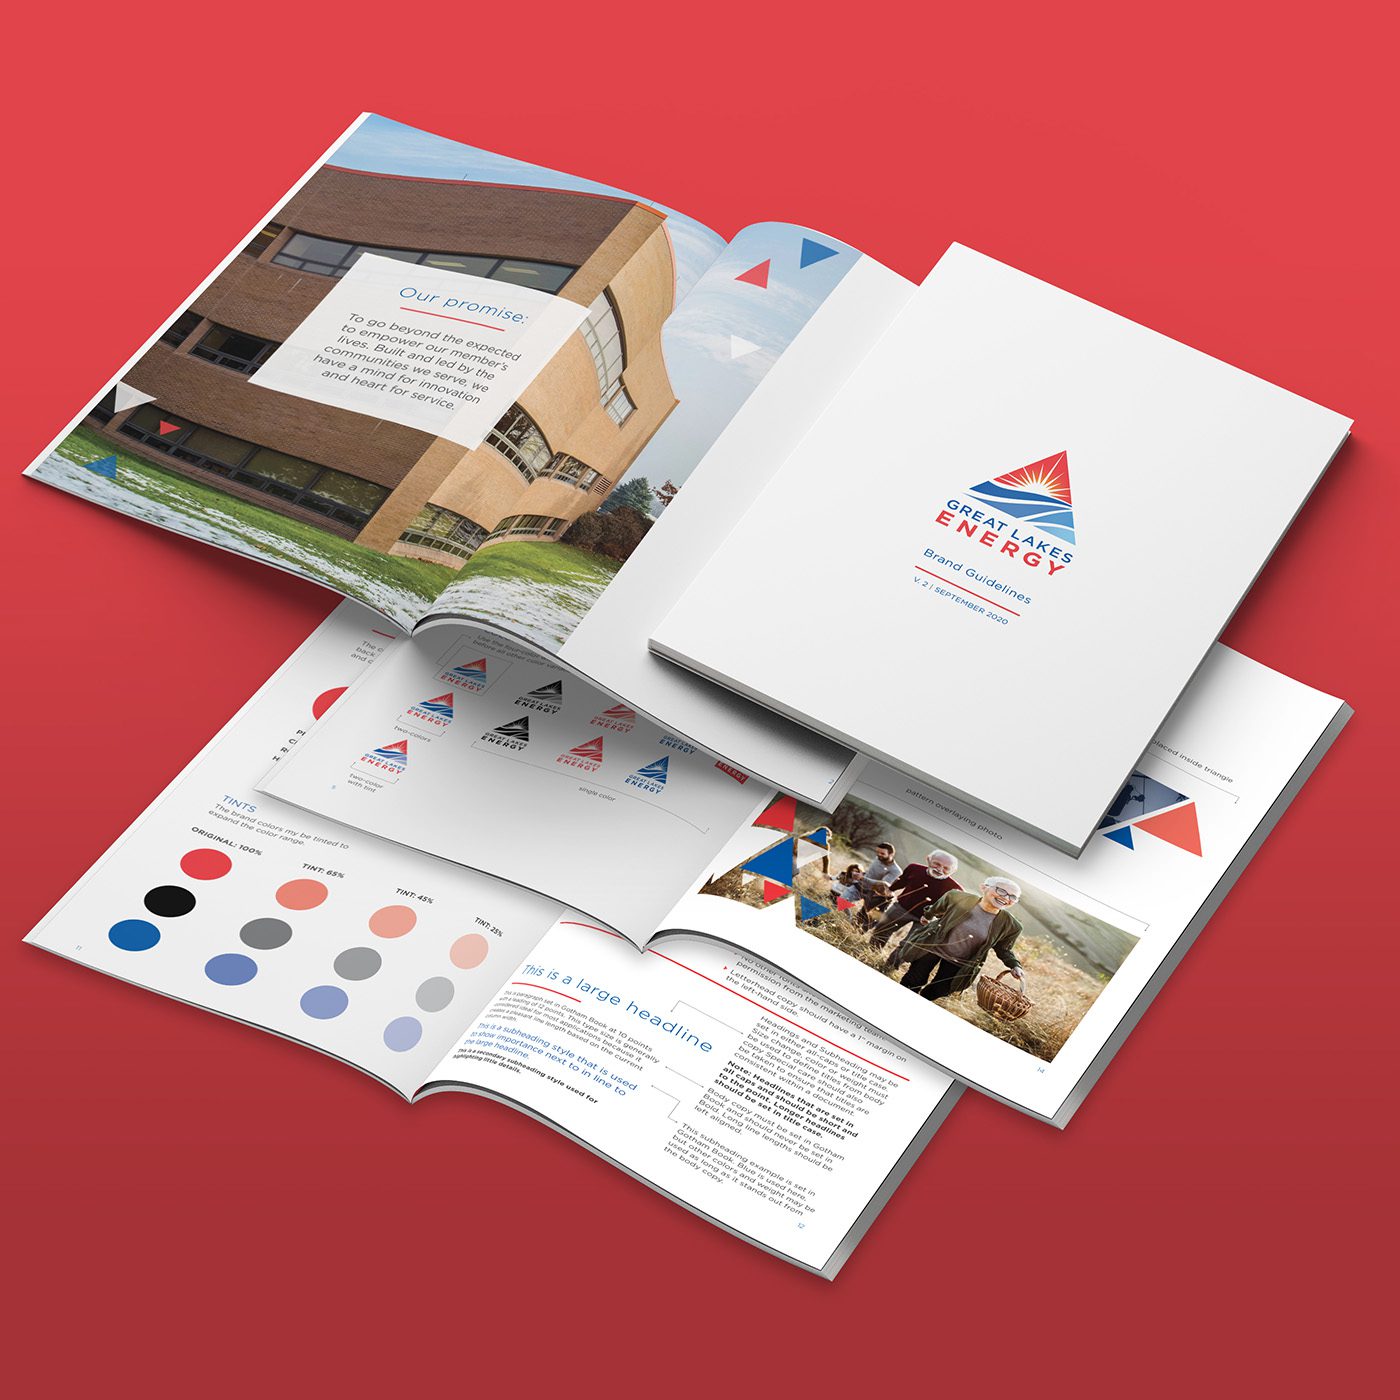 Brand Redesign for Michigan Utility CoOp Great Lakes Energy